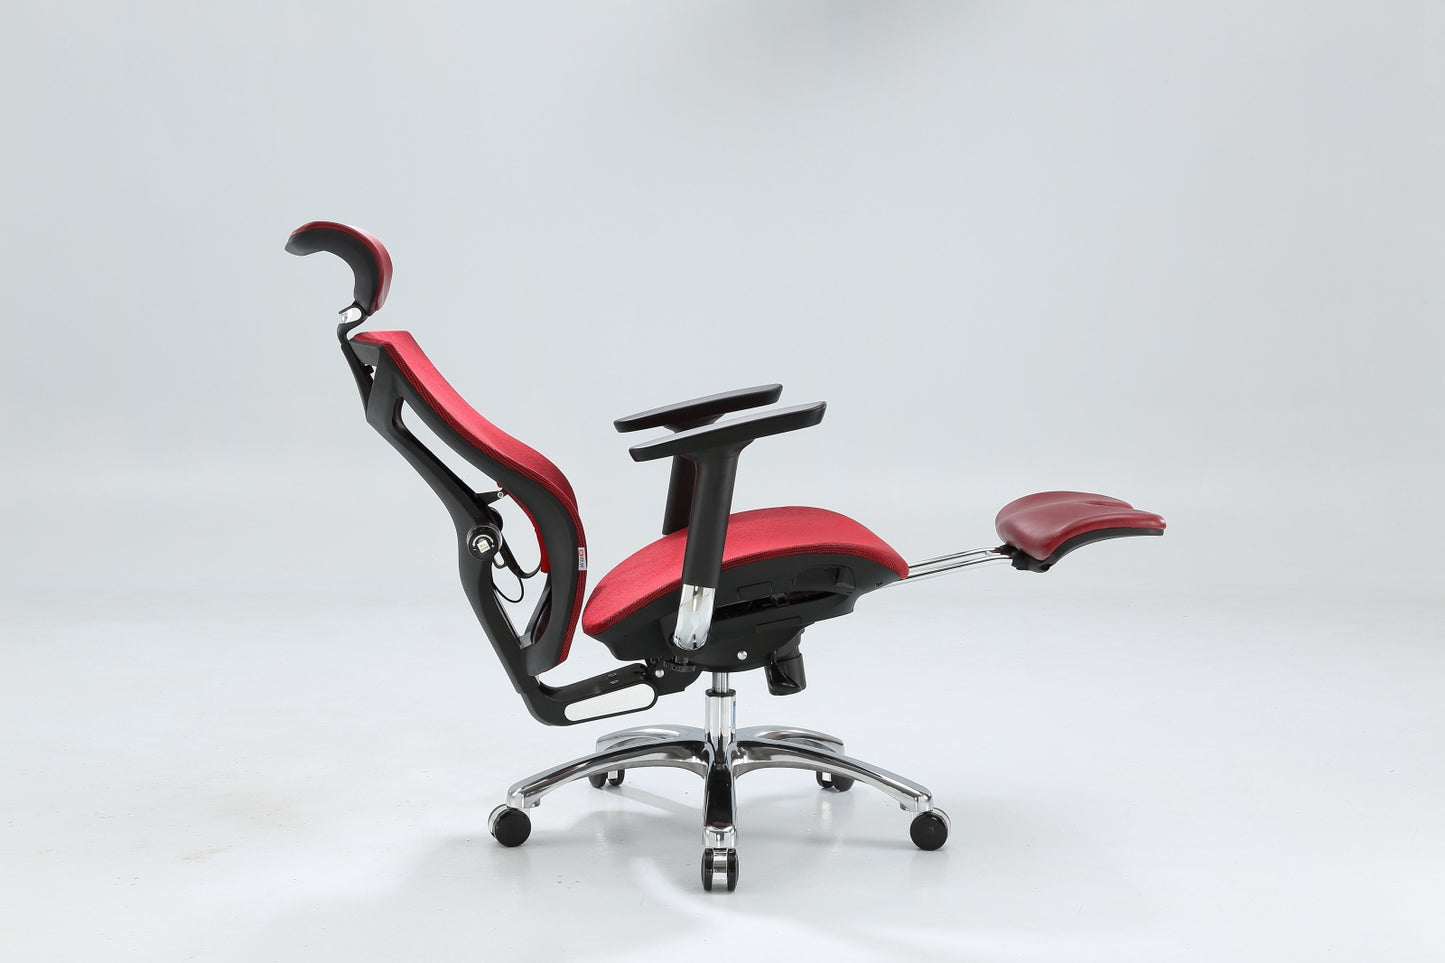 Sihoo V1 Limited Edition (with built-in footrest)